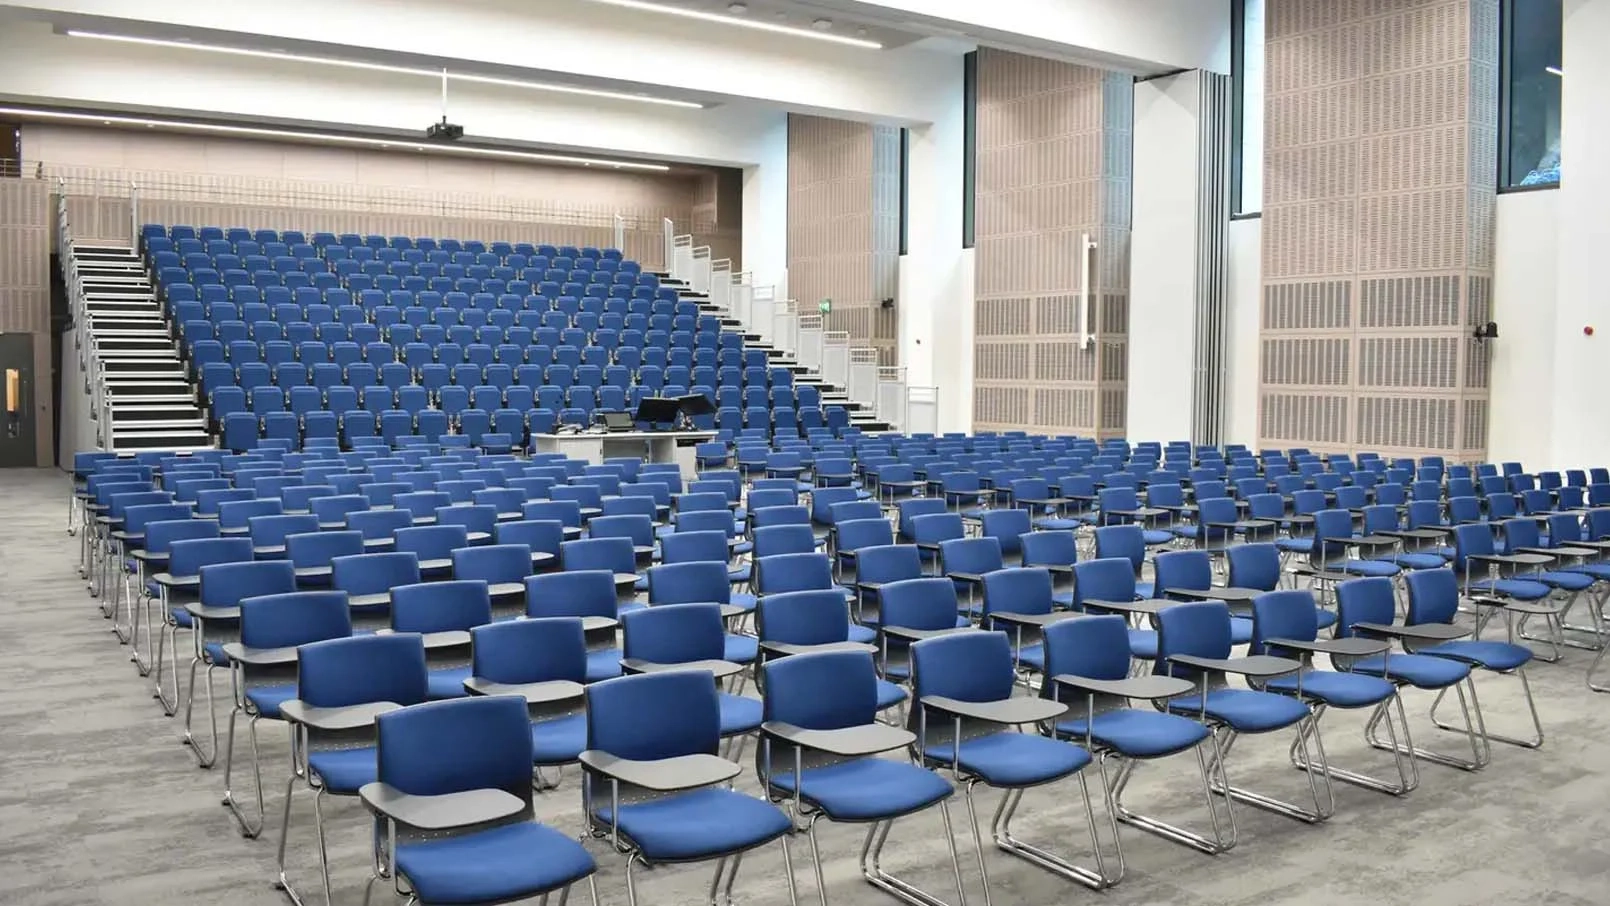 rows of blue chairs in a lecture theatre with raised seating